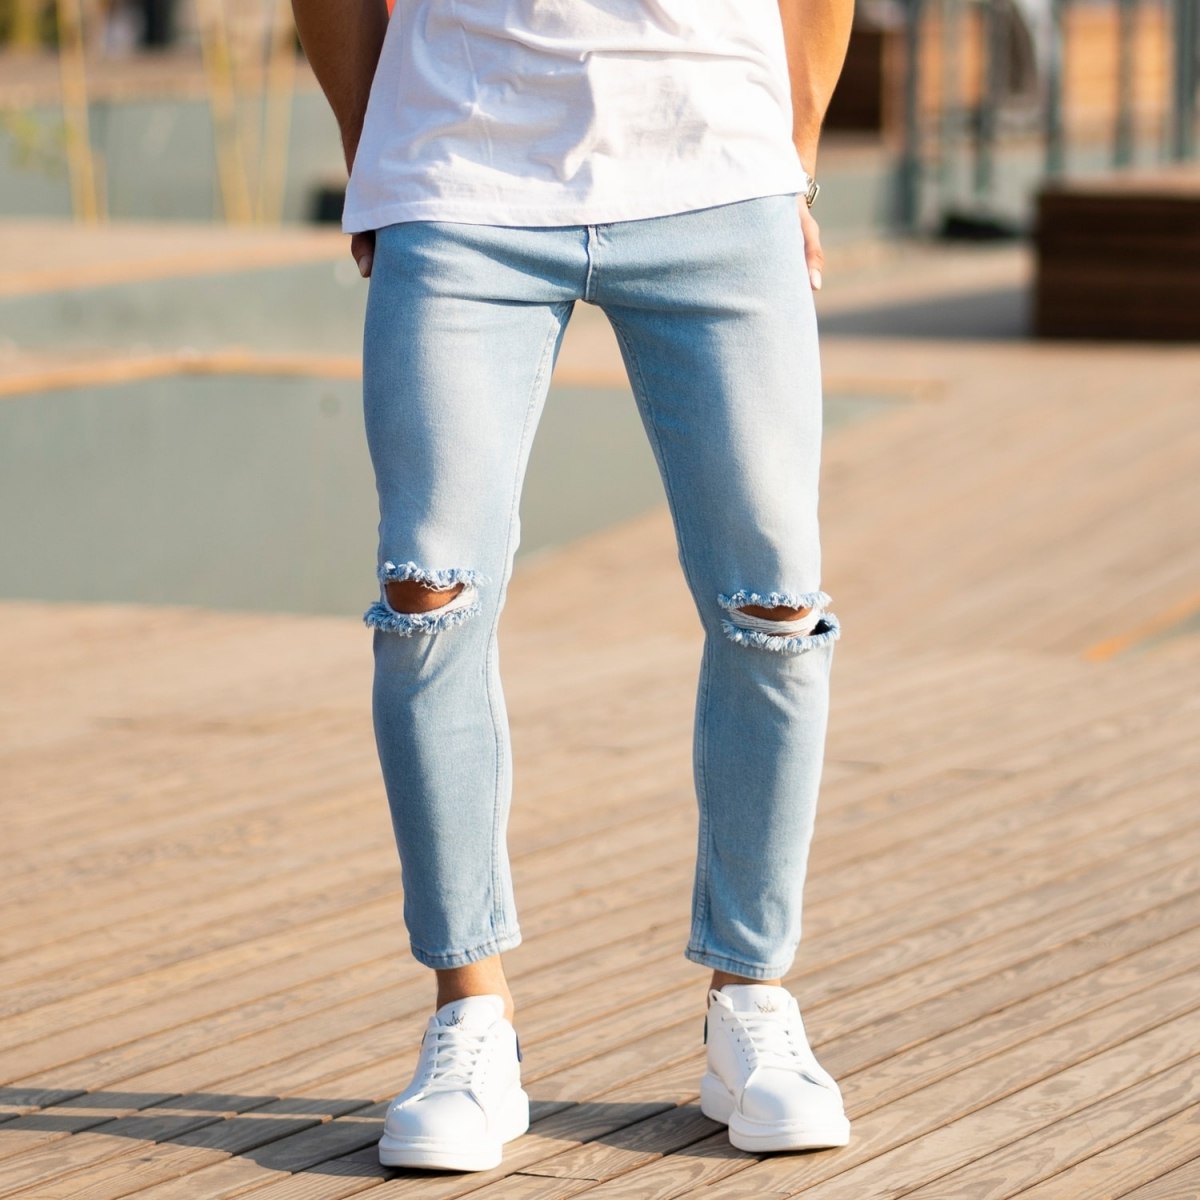 Men's Light-Blue Jeans With Rips